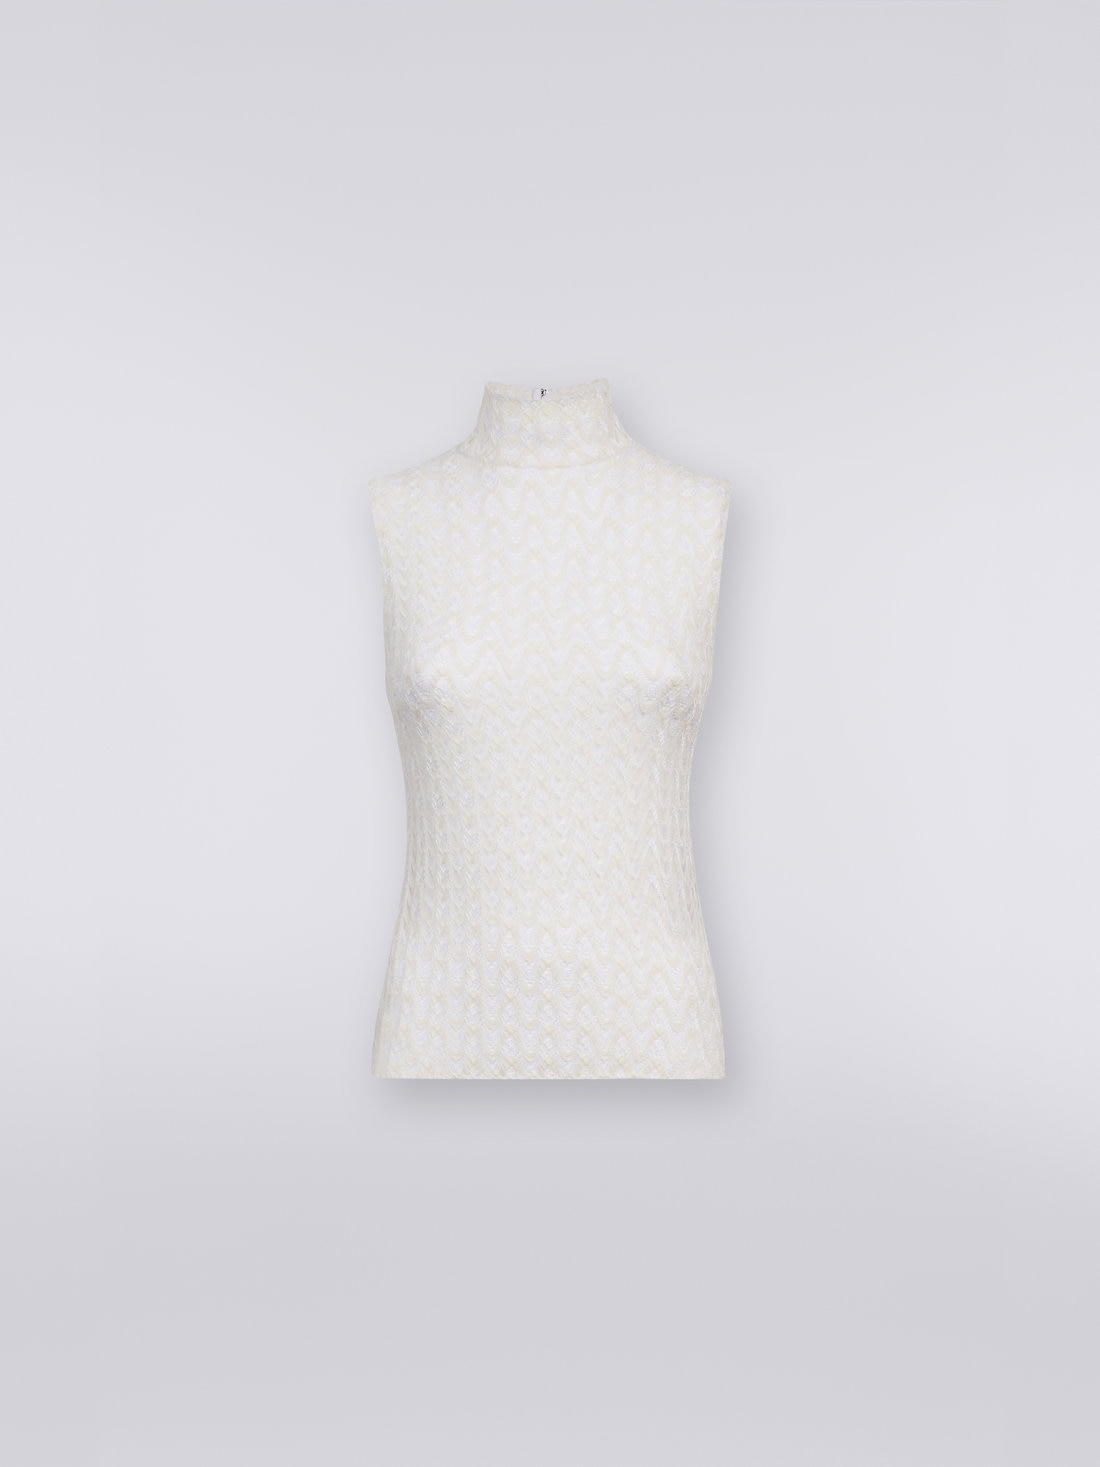 Raschel knit wool and viscose sleeveless top , White  - DS23WK01BR00NU14001 - 0